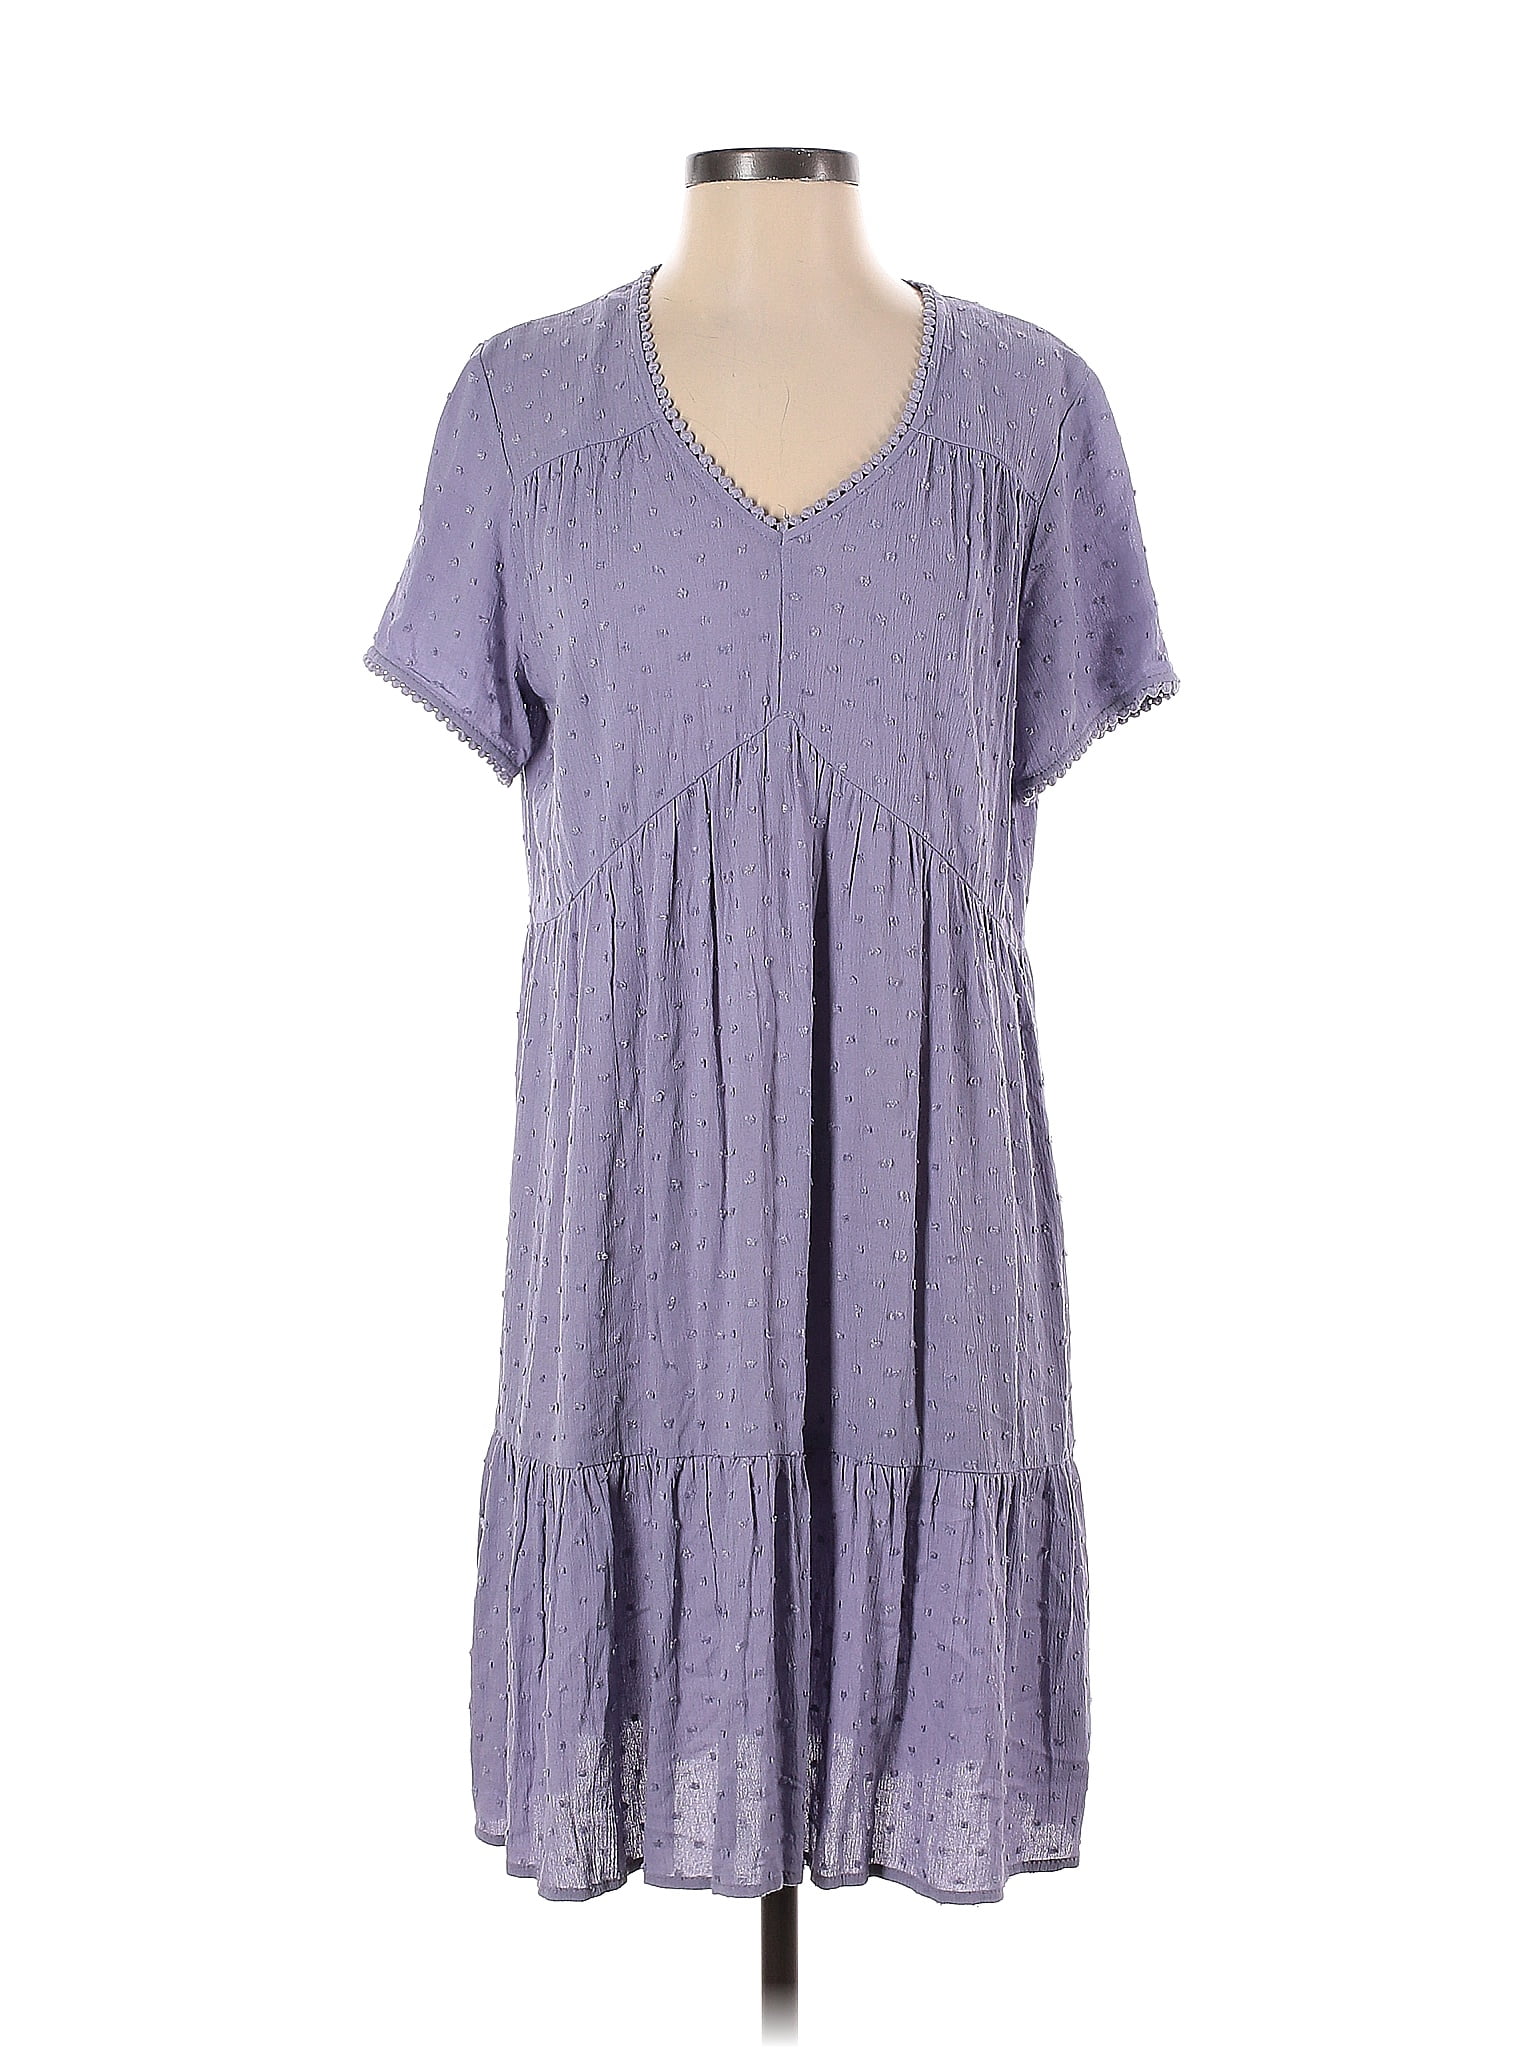 Knox Rose 100% Rayon Purple Casual Dress Size S - 16% off | thredUP